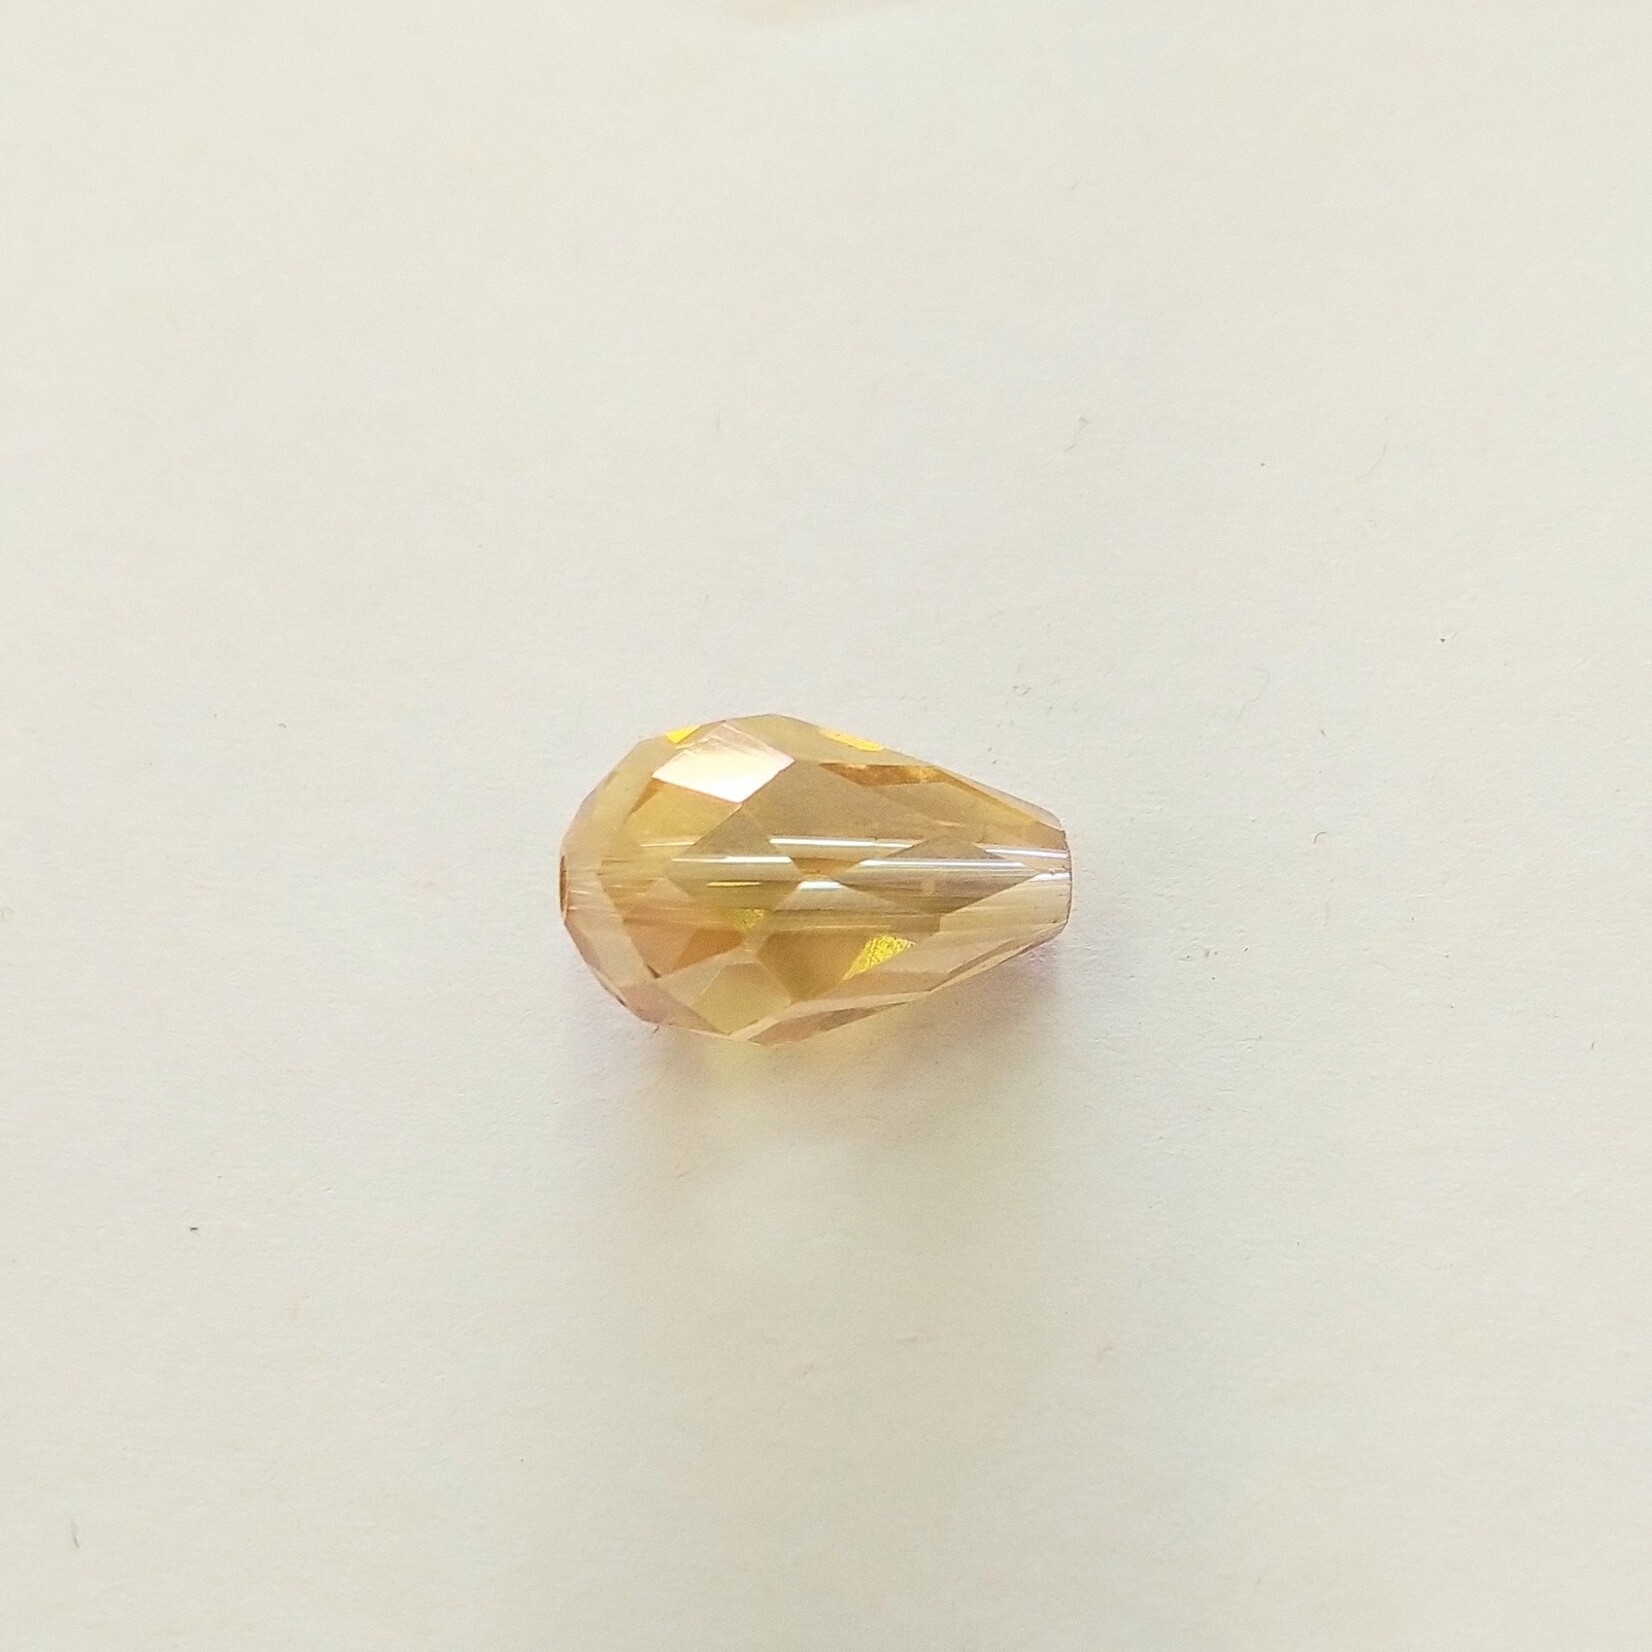 Faceted Crystal Teardrop 15x10mm Yellow Bead